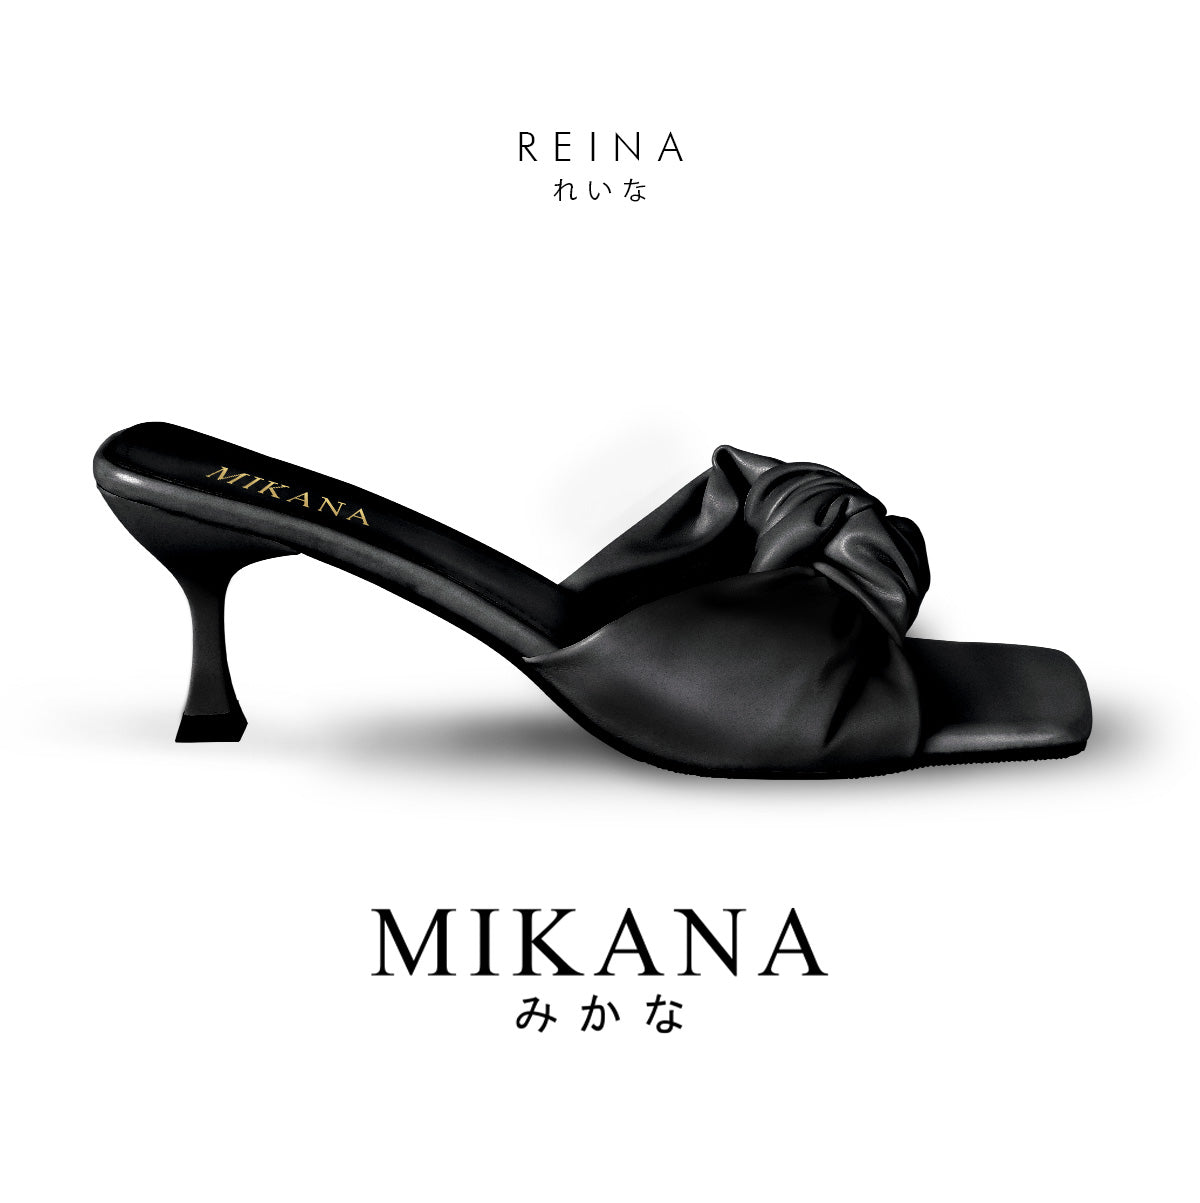 Reina Knot Slides 2.5 inches Heels Sandals Shoes